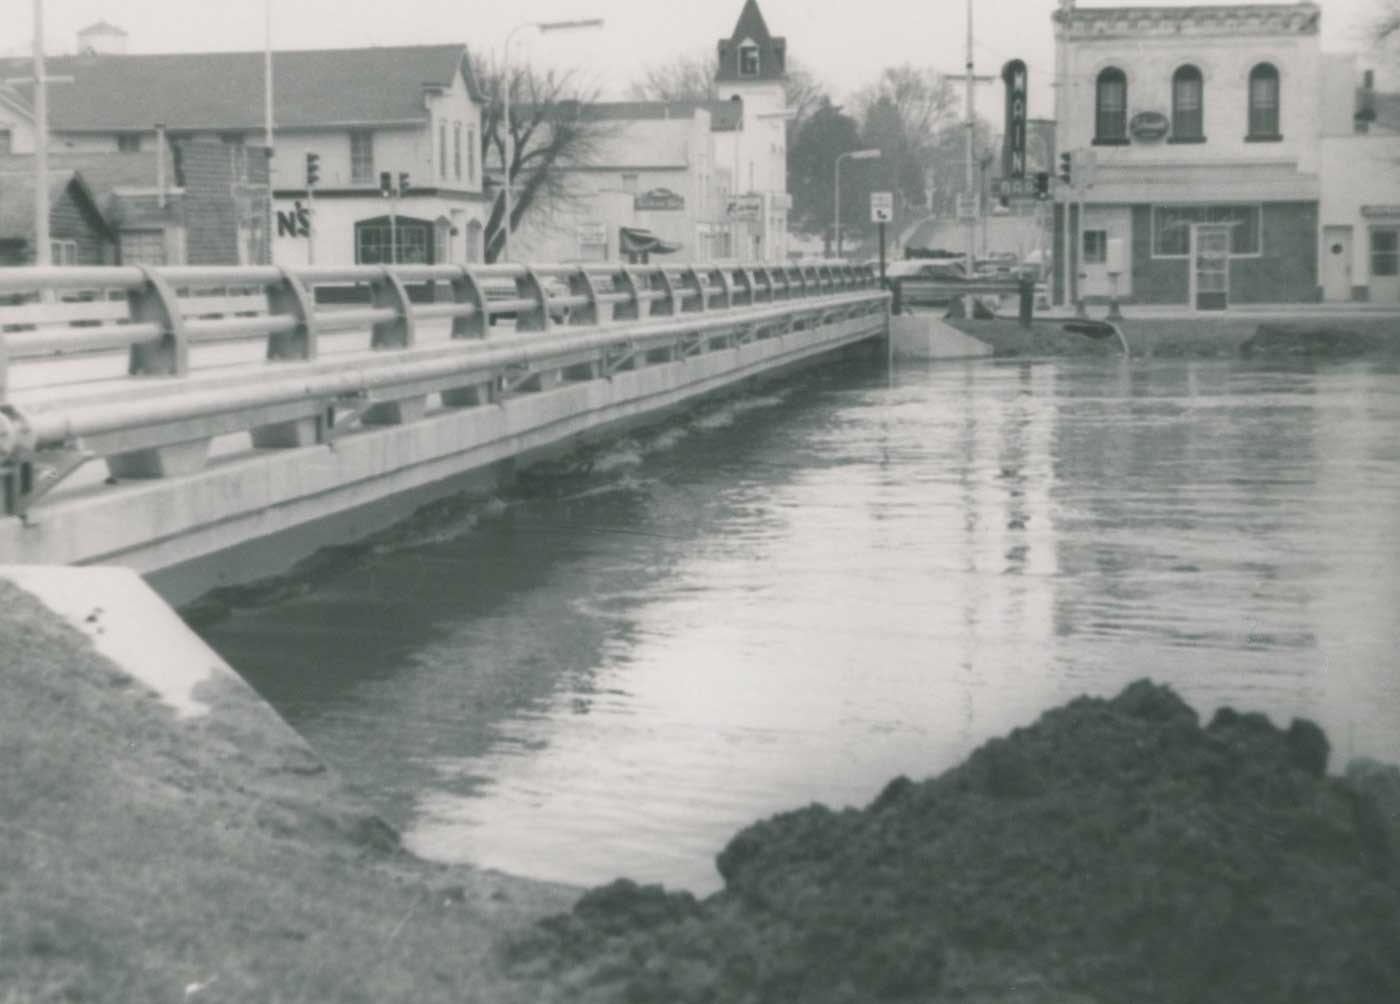 11. Flooding in 1960's